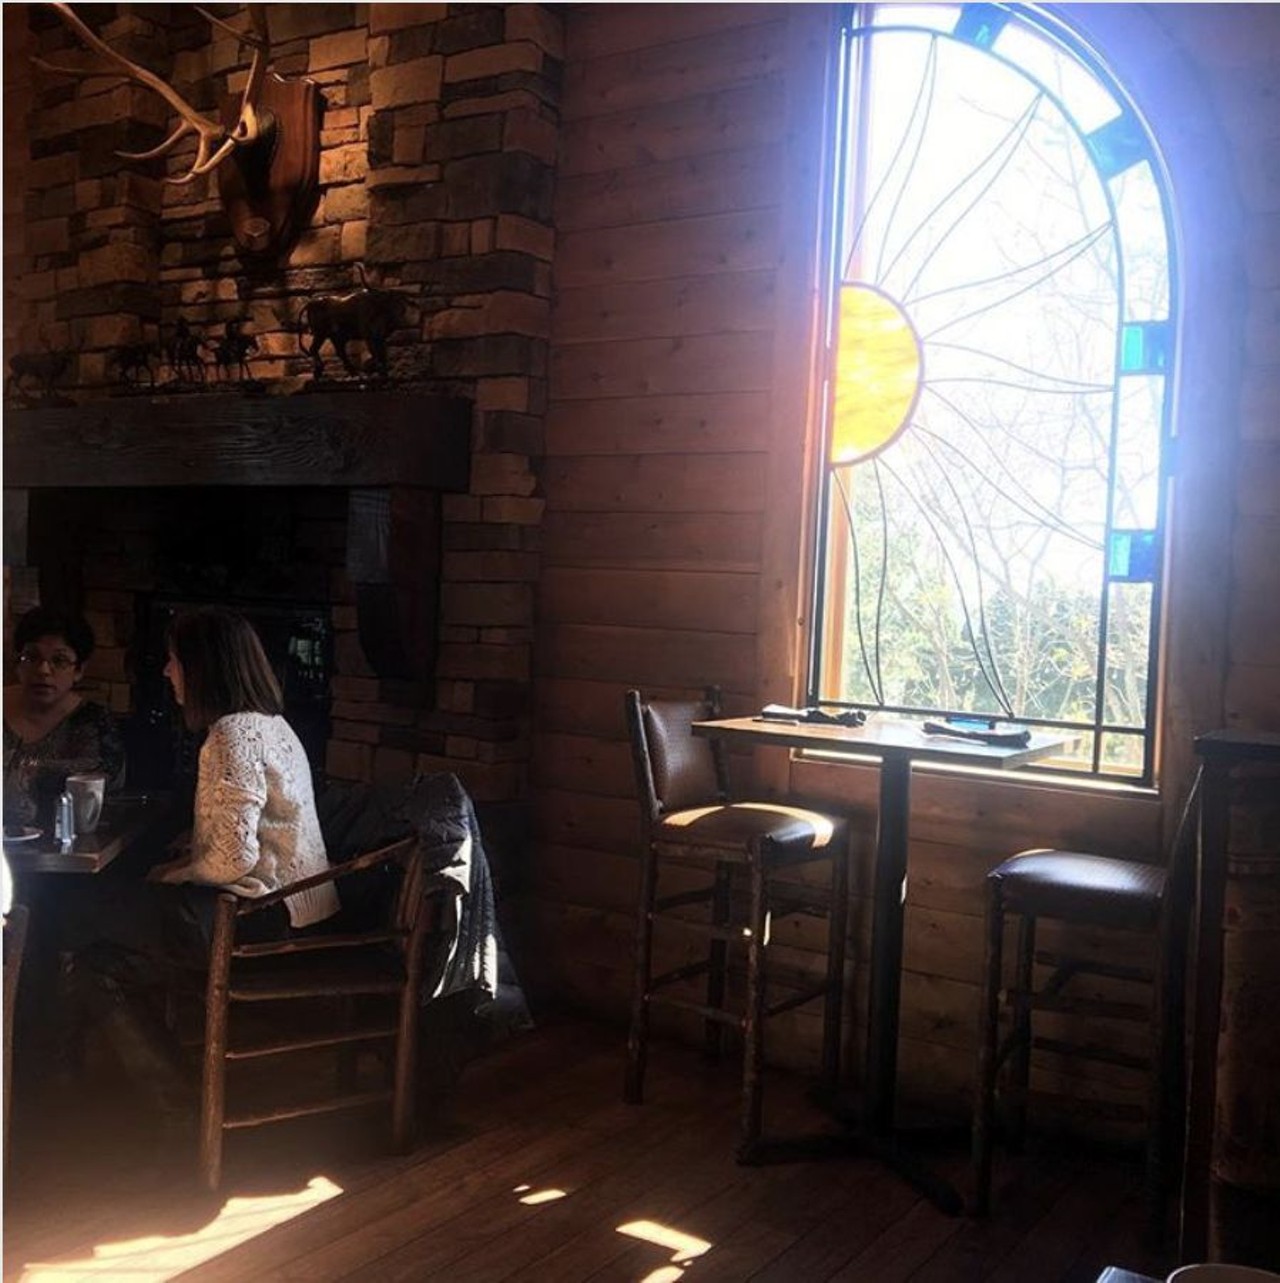 Blue Canyon Kitchen & Tavern
8960 Wilcox Dr., Twinsburg 
Inspired by America&#146;s grand lodges, Blue Canyon&#146;s Twinsburg location gives diners more nature views than they could ever ask for, through both stained glass and regular pane windows.
Photo via mia_n_moi/Instagram